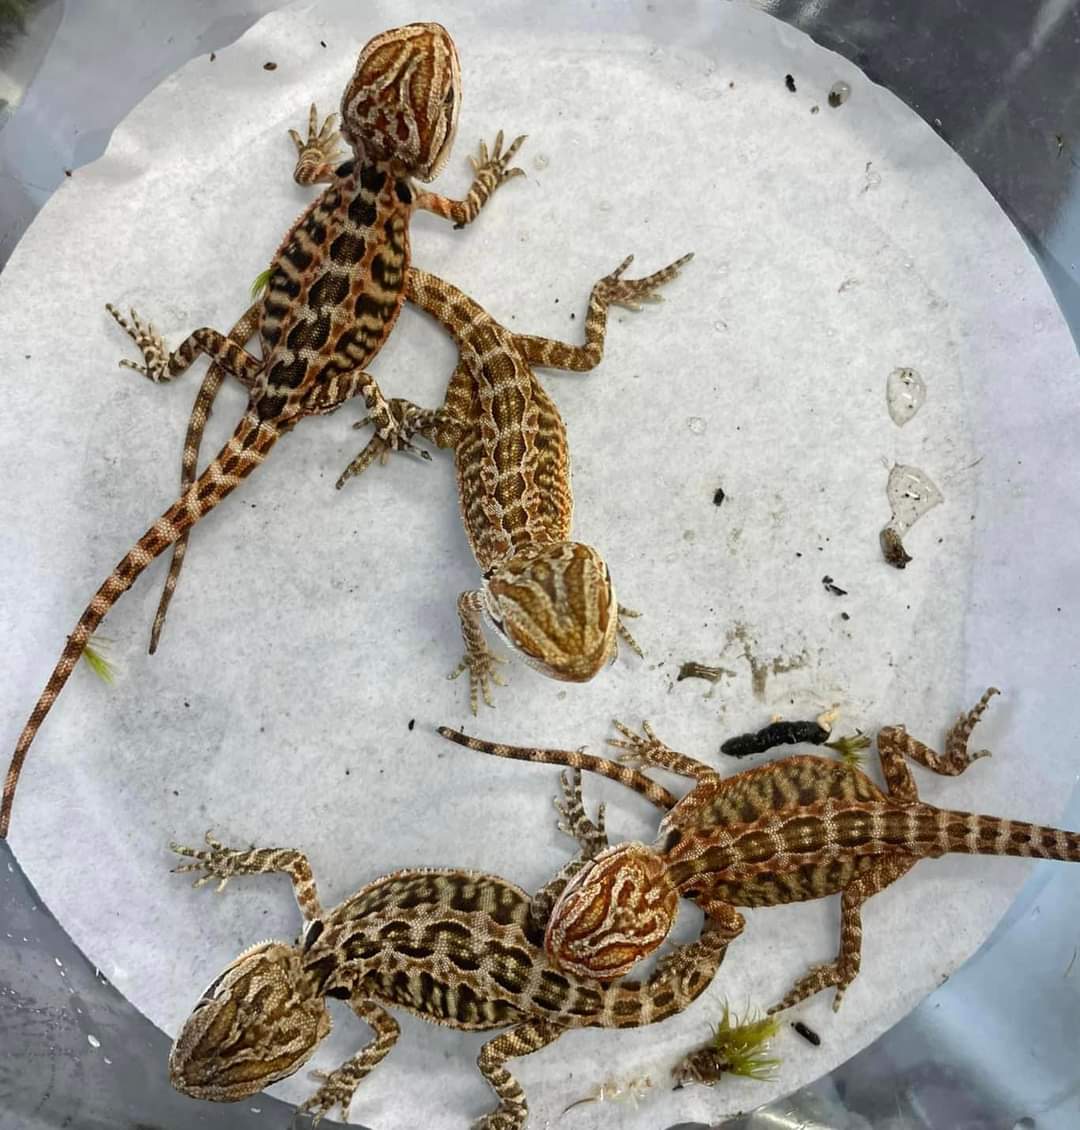 Baby Bearded Dragons for sale